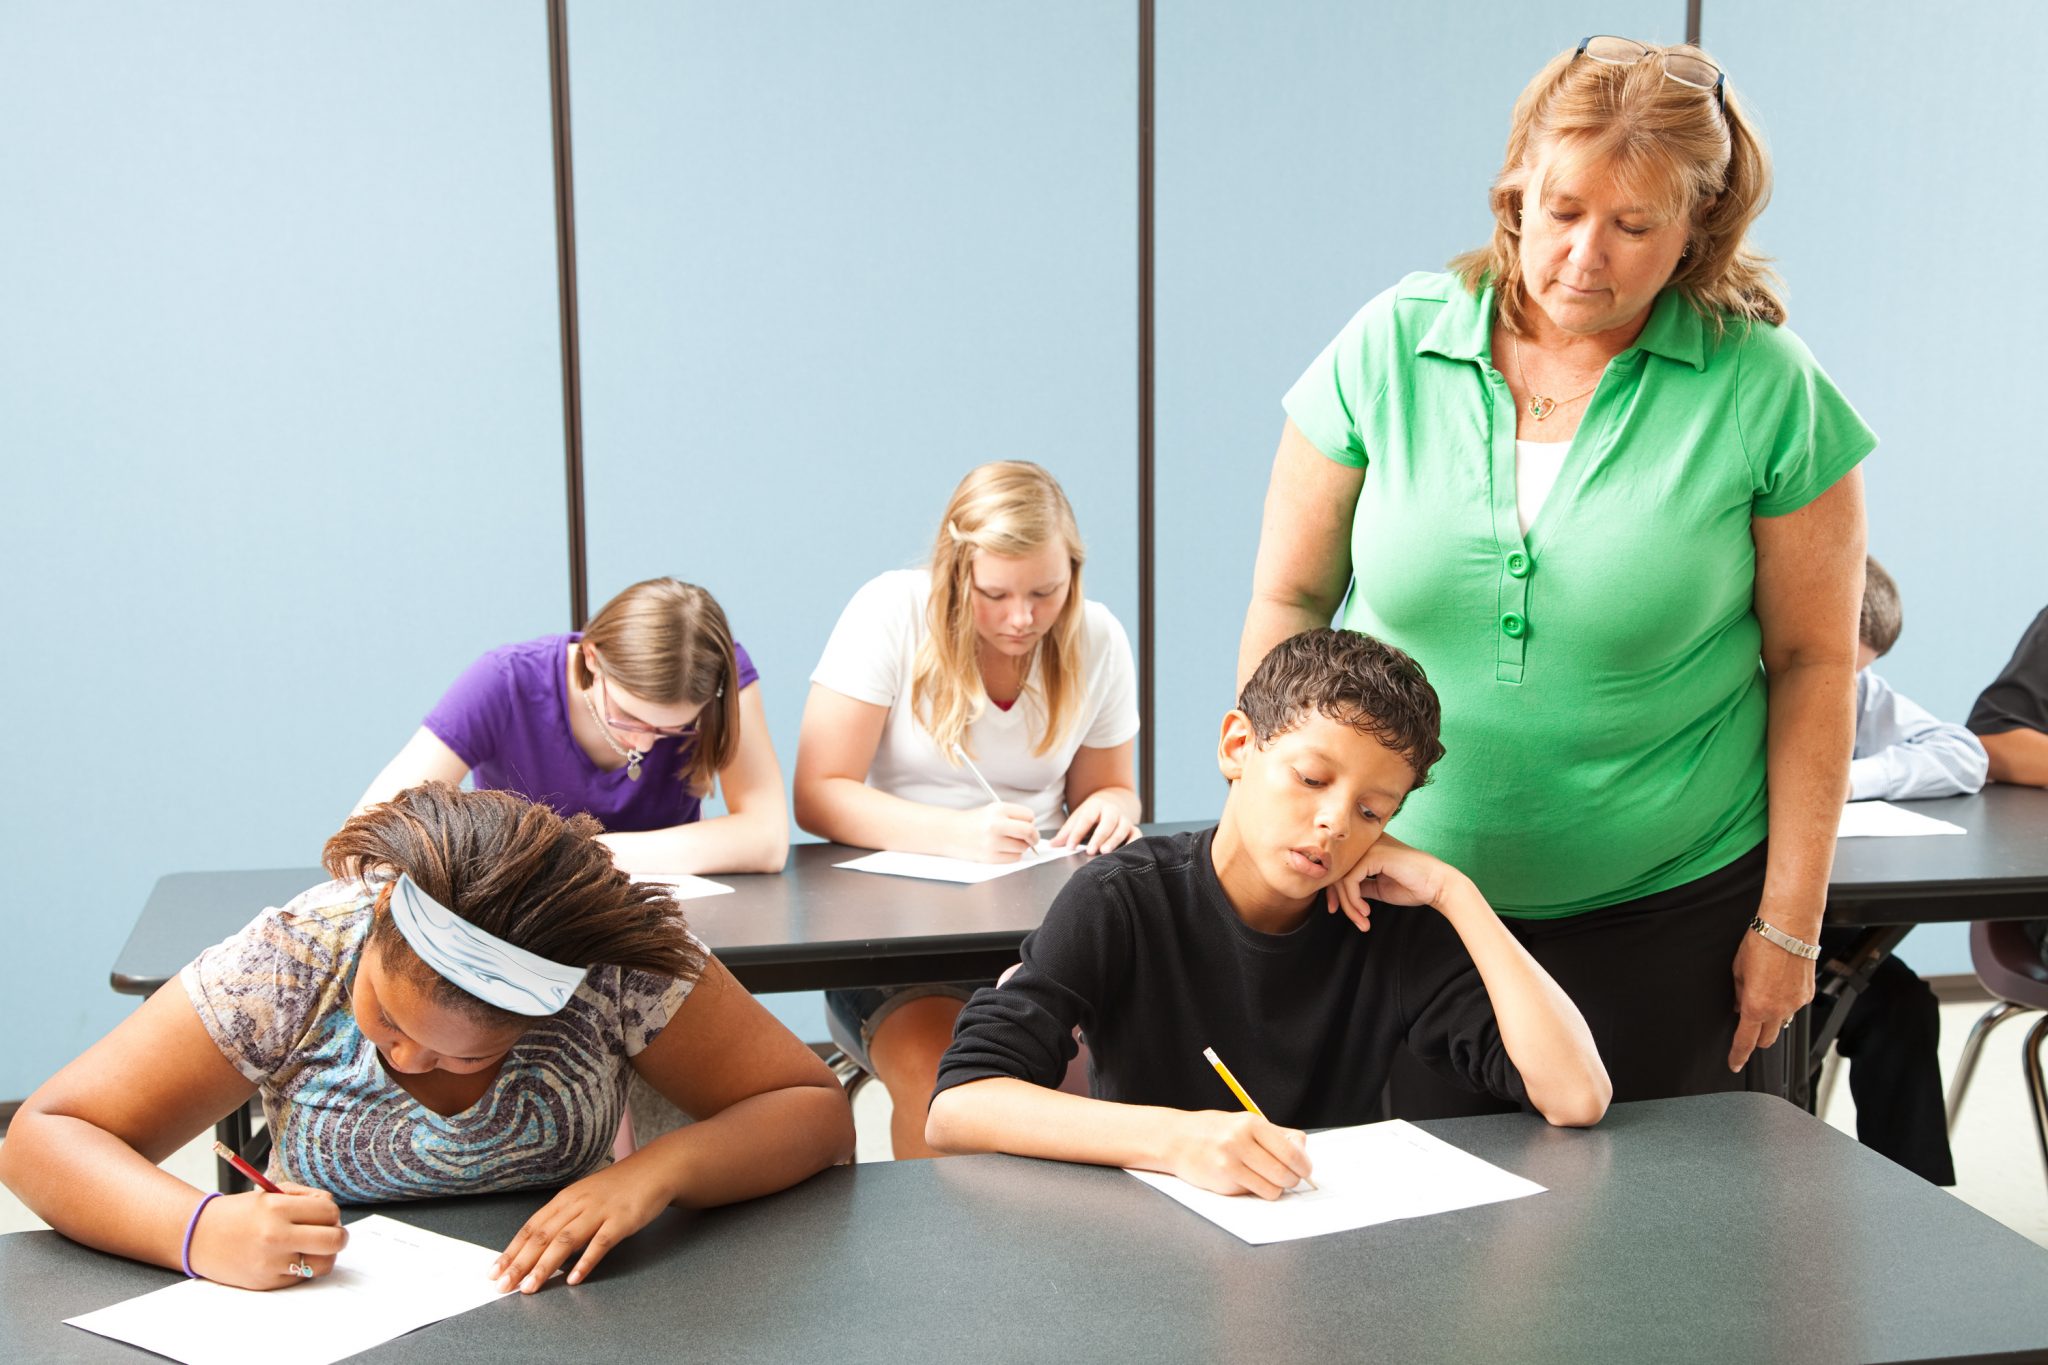 Social emotional learning - Teacher supervising students who are taking a standardized achievement test.